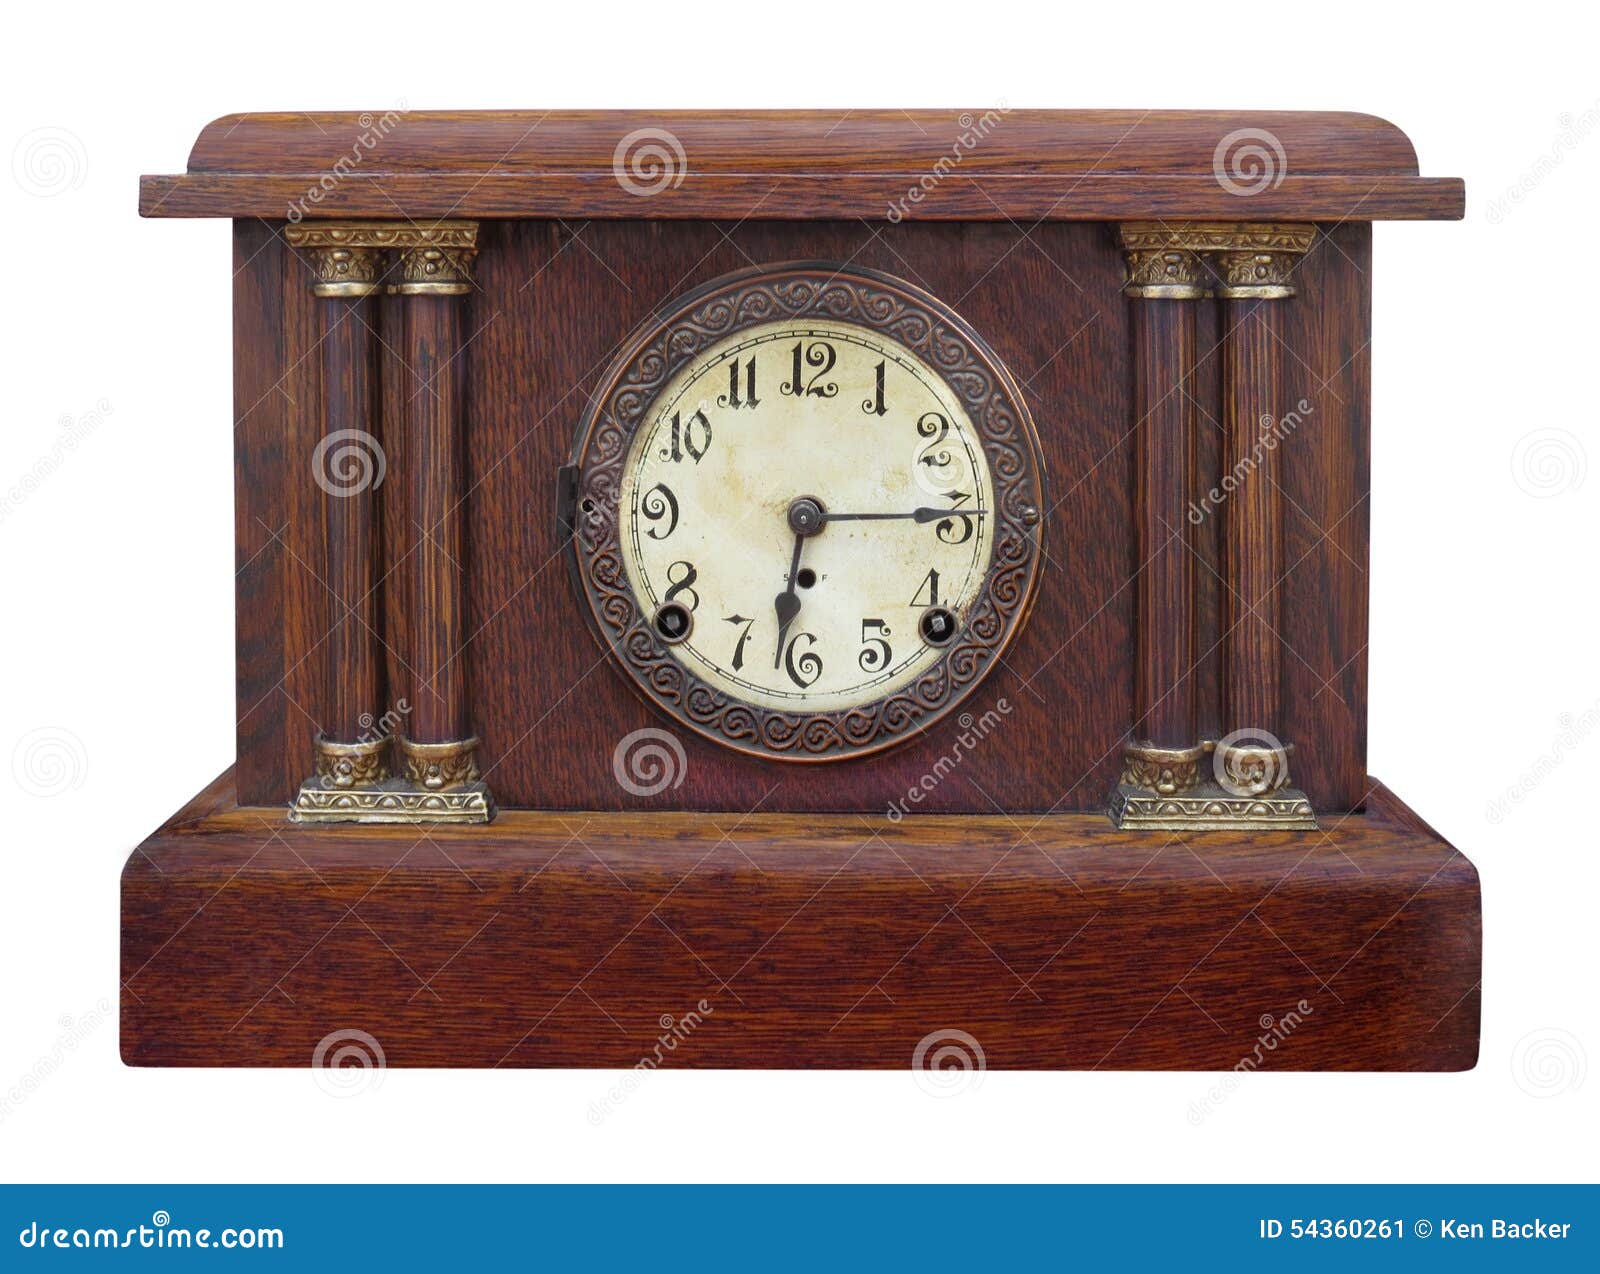 Antique Wooden Mantel Clock Isolated. Stock Photo - Image: 54360261